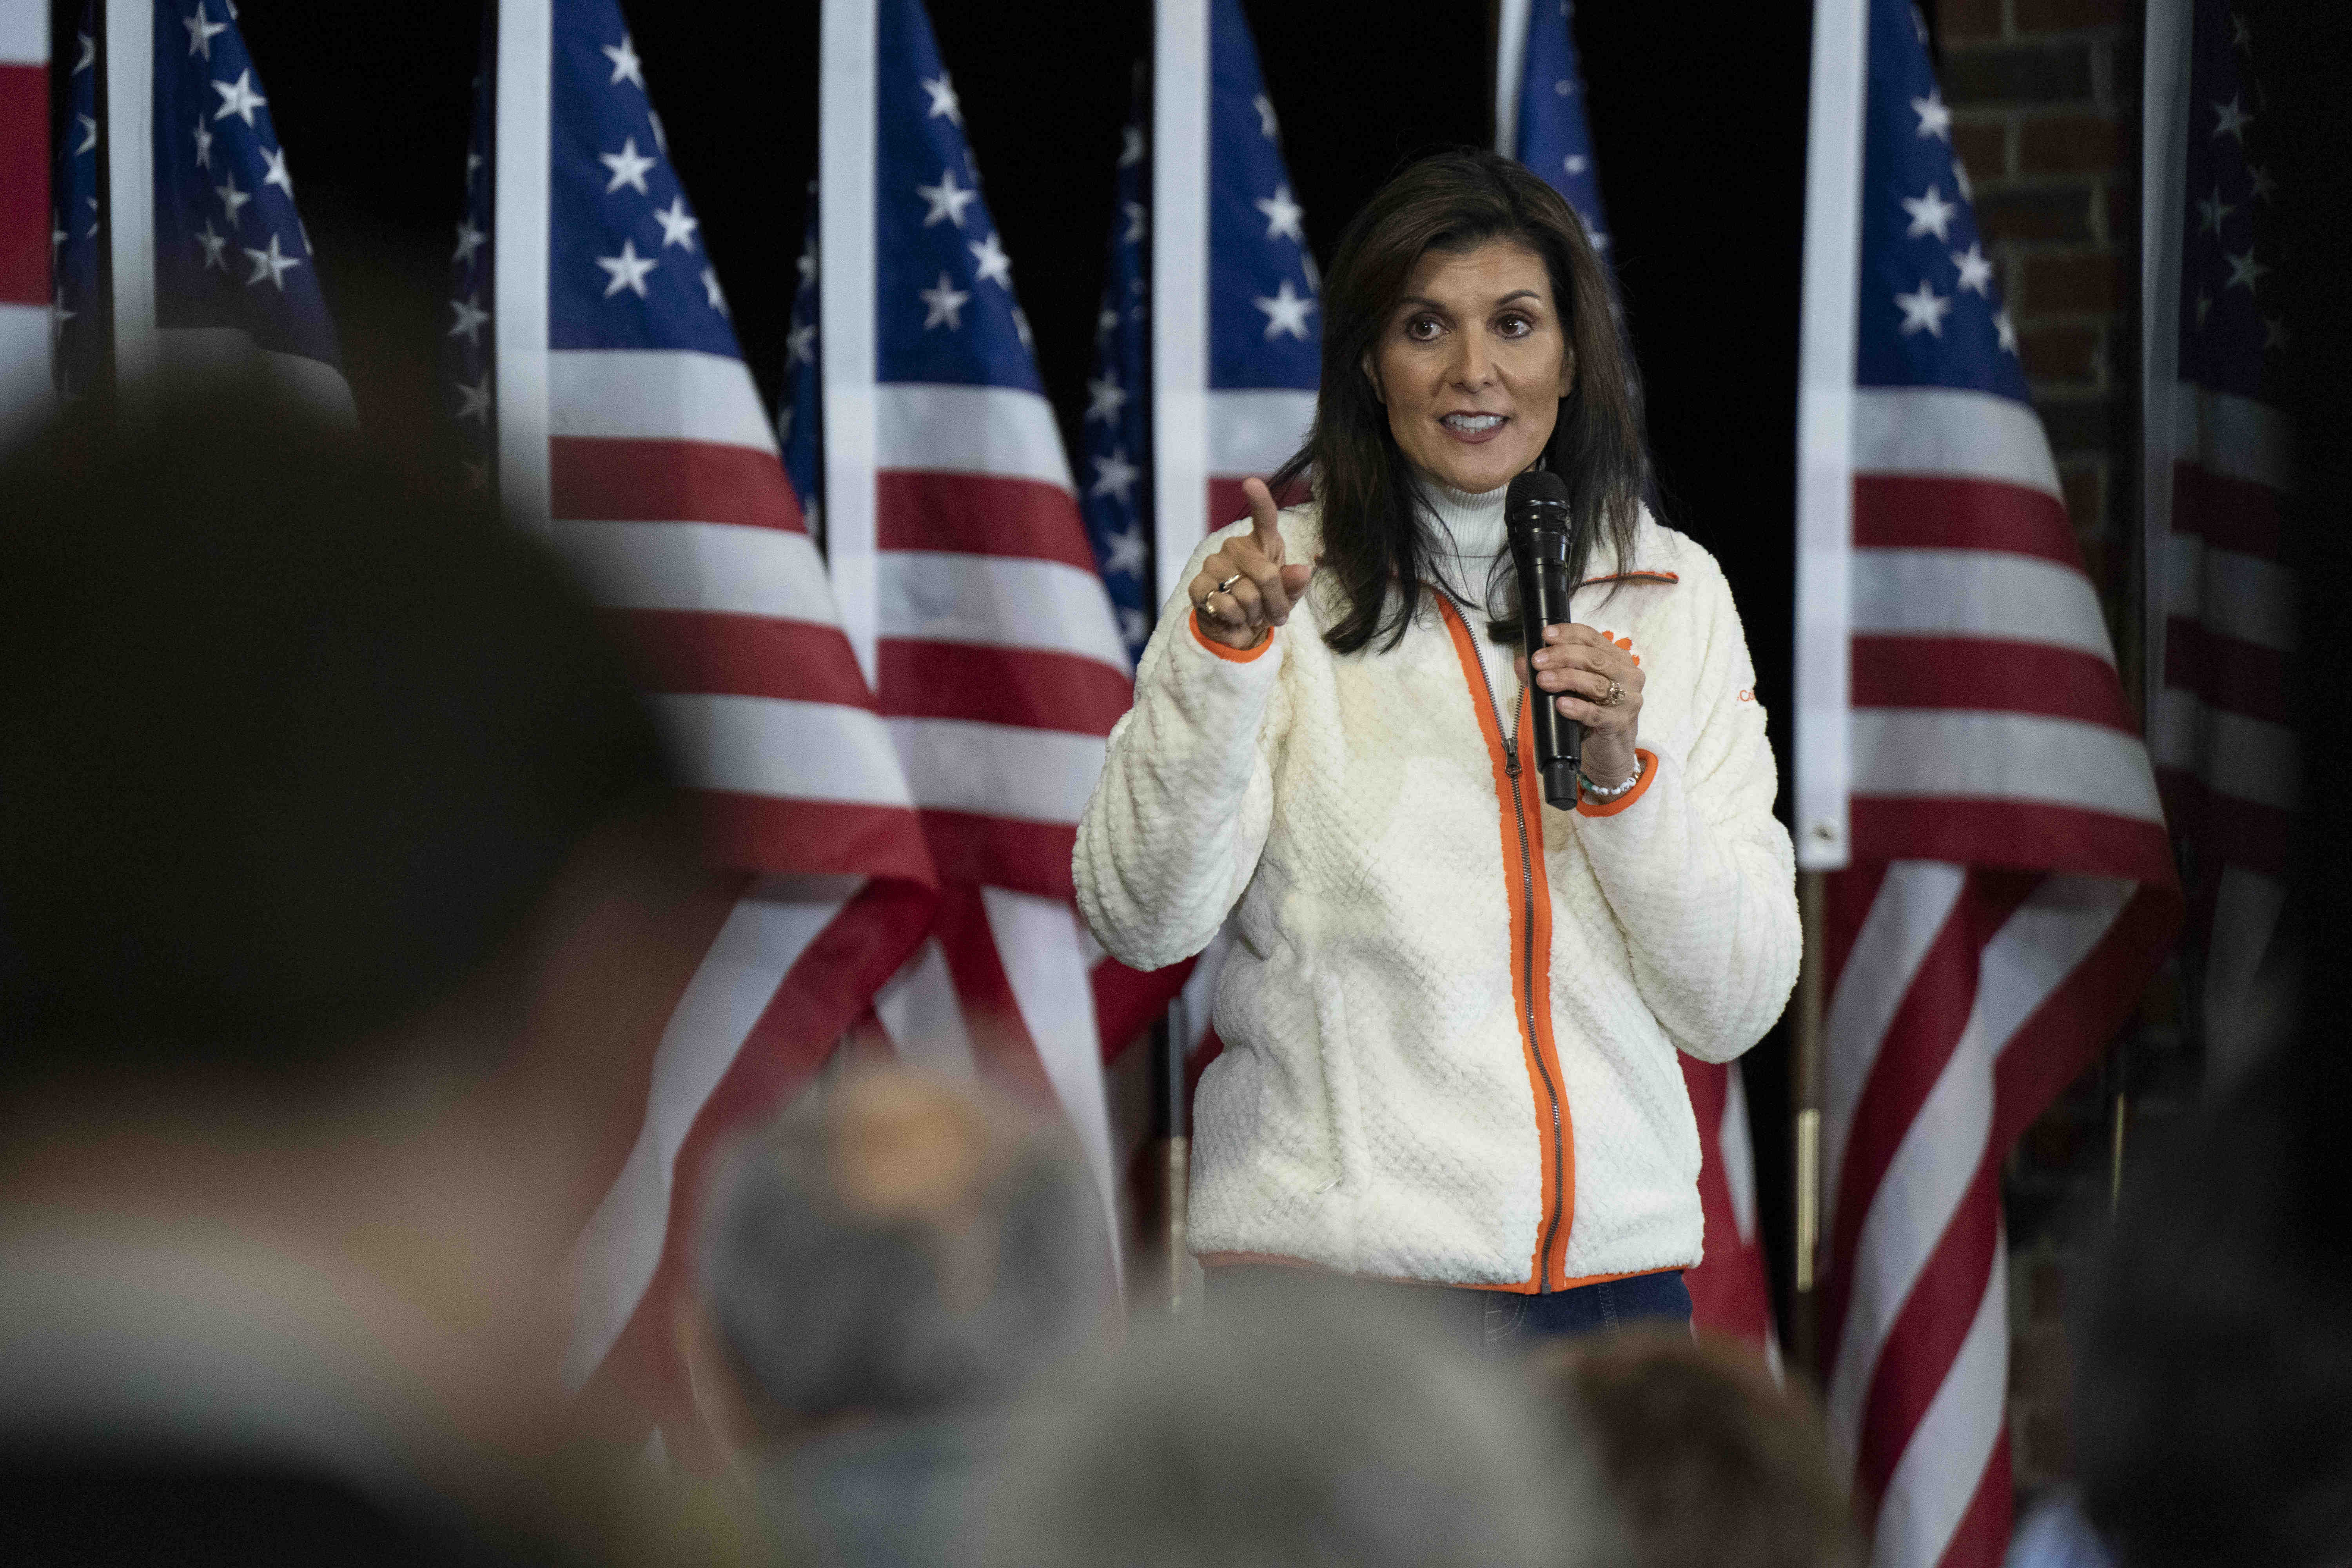 Nikki Haley Campaigns For President In South Carolina